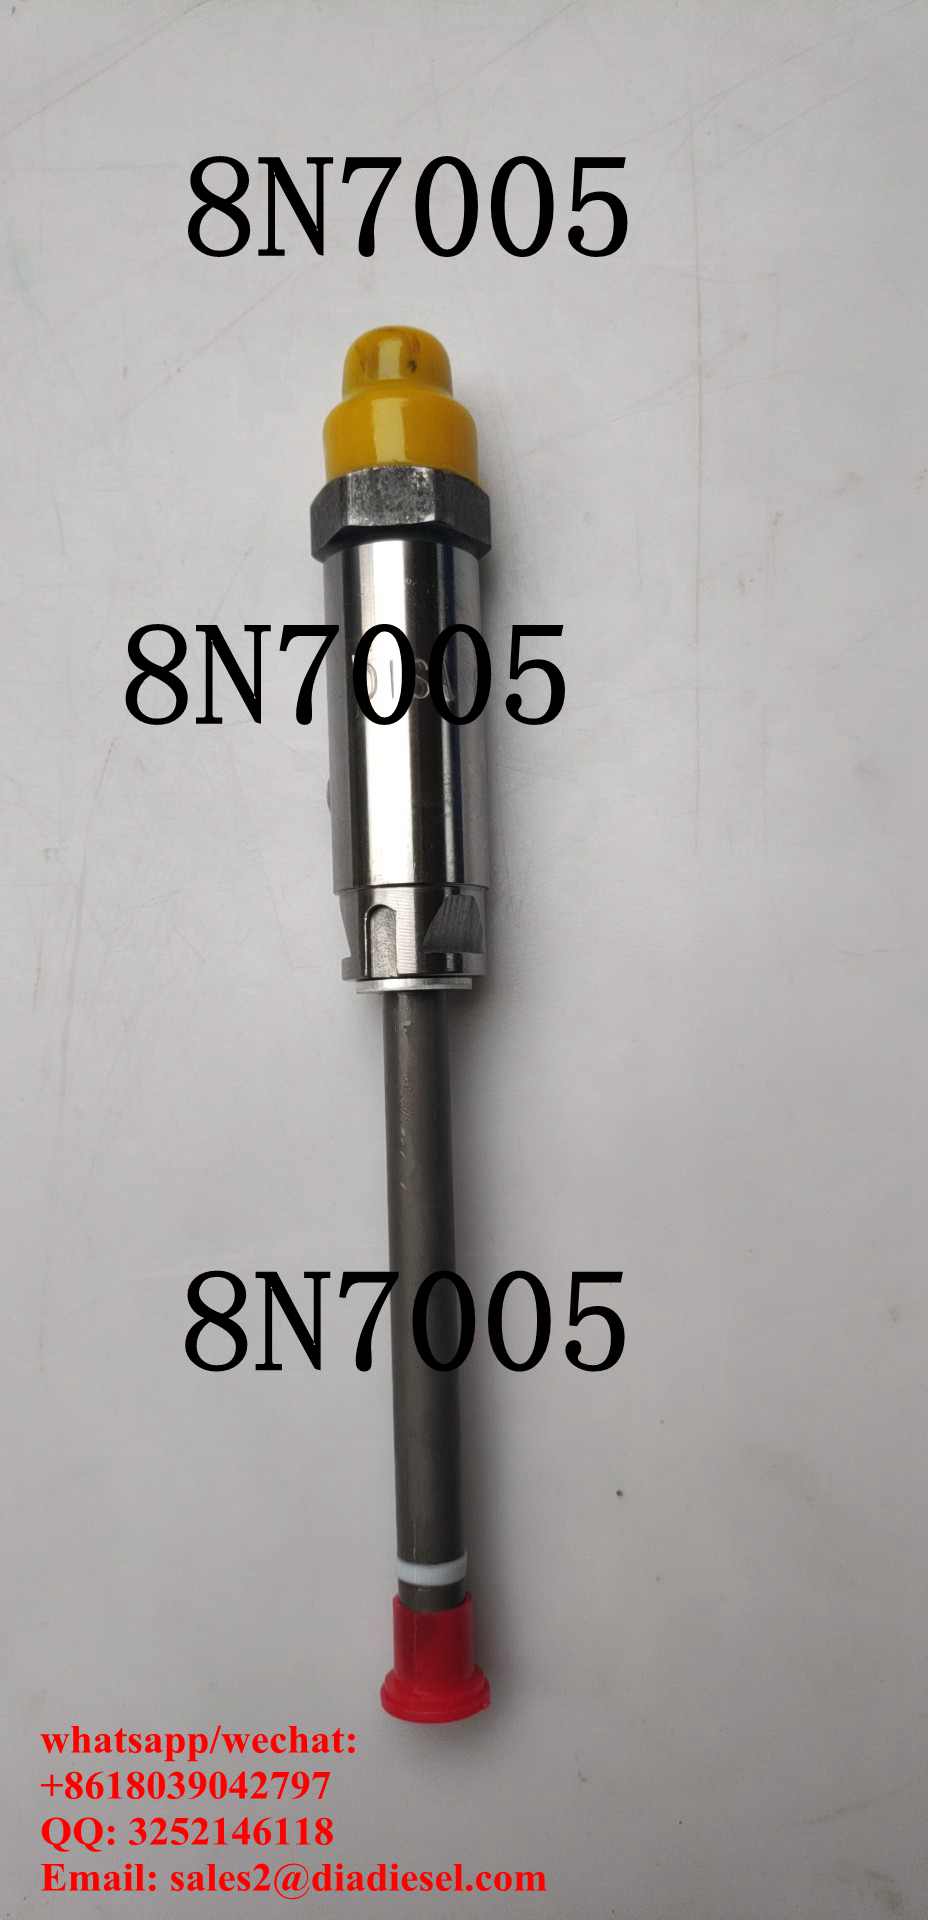 DiDiesel Fuel Injector Nozzle 8N7005 for Engine 3306esel Fuel Injector Nozzle 8N7005 for Engine 3306